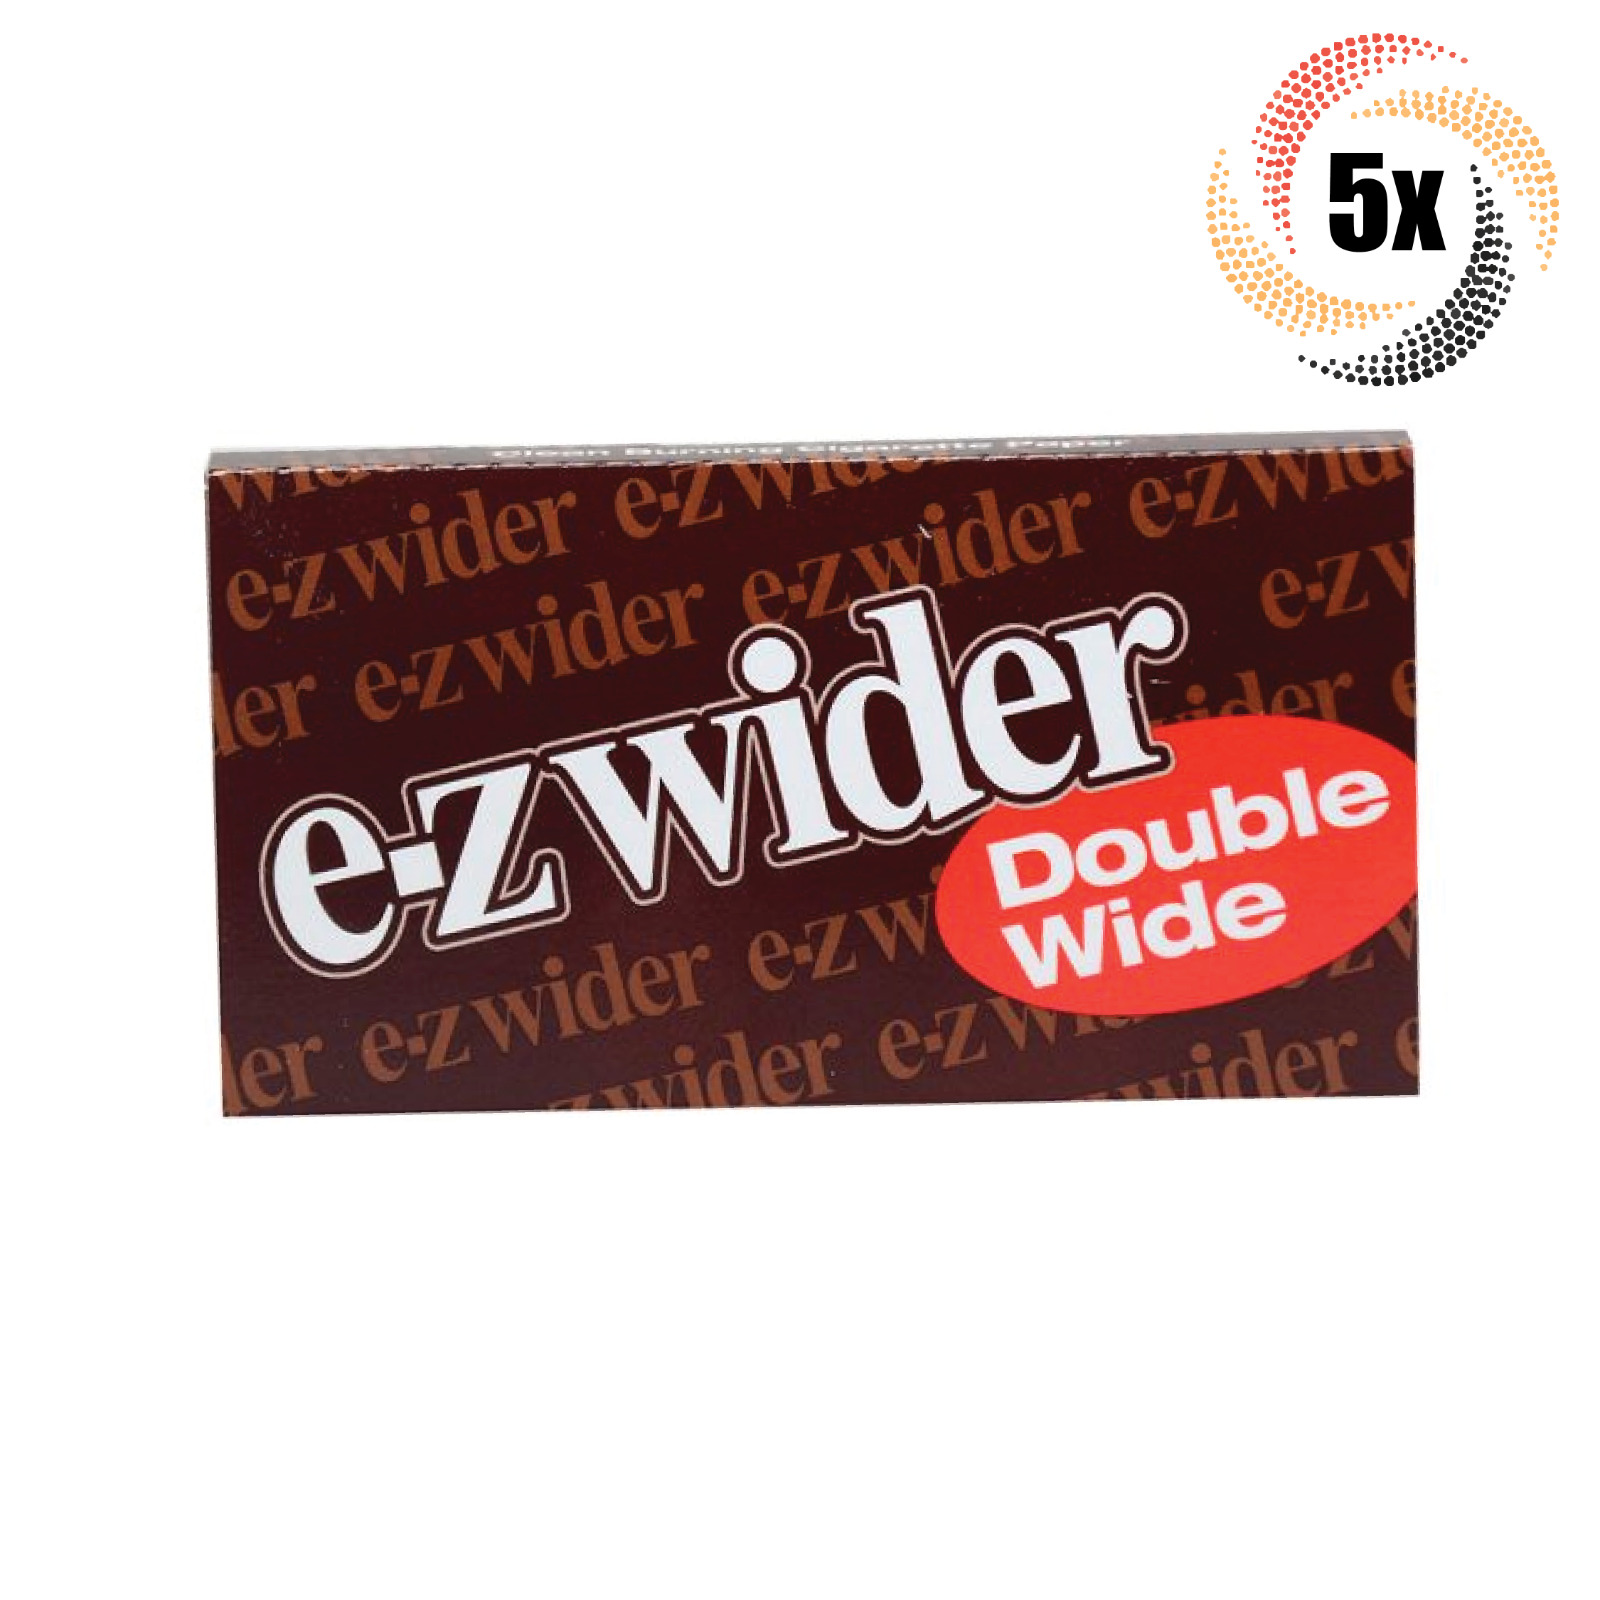 5x Packs E-Z Wider Double Wide | 1.0 | 24 Papers Per Pack | + 2 Rolling Tubes